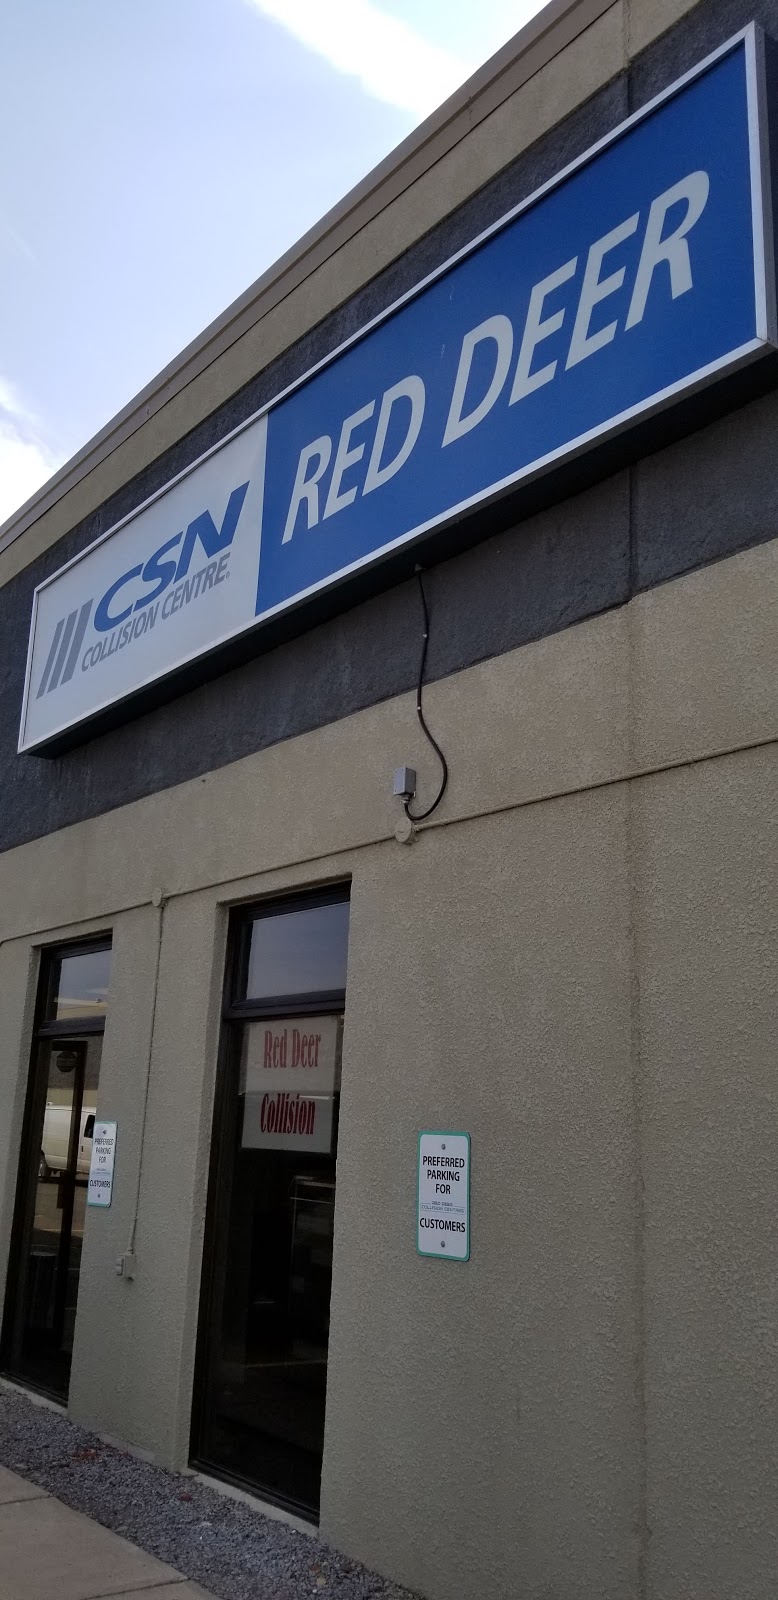 CSN Red Deer Collision South | B8/ 9 2319 Taylor Dr, Red Deer, AB T4R 2R1, Canada | Phone: (403) 346-5301